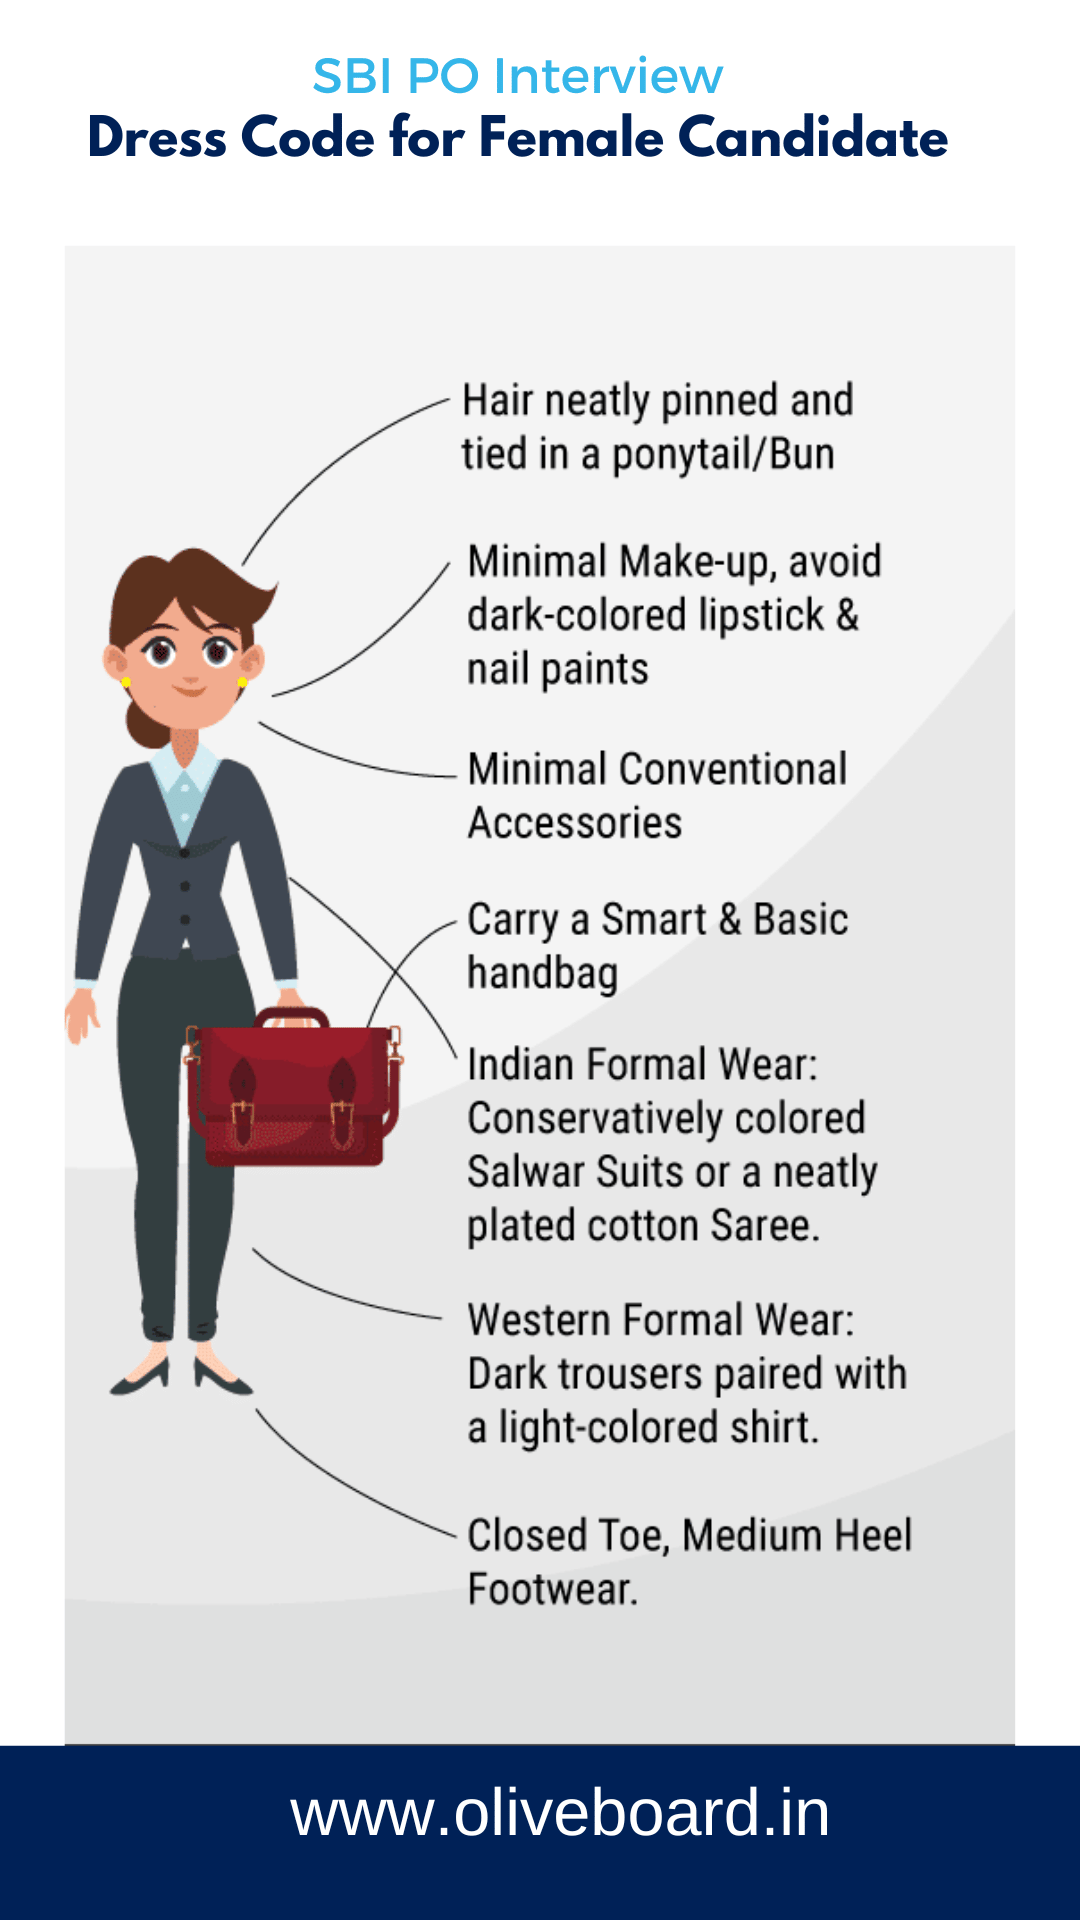 SBI PO Dress code for Female candidate